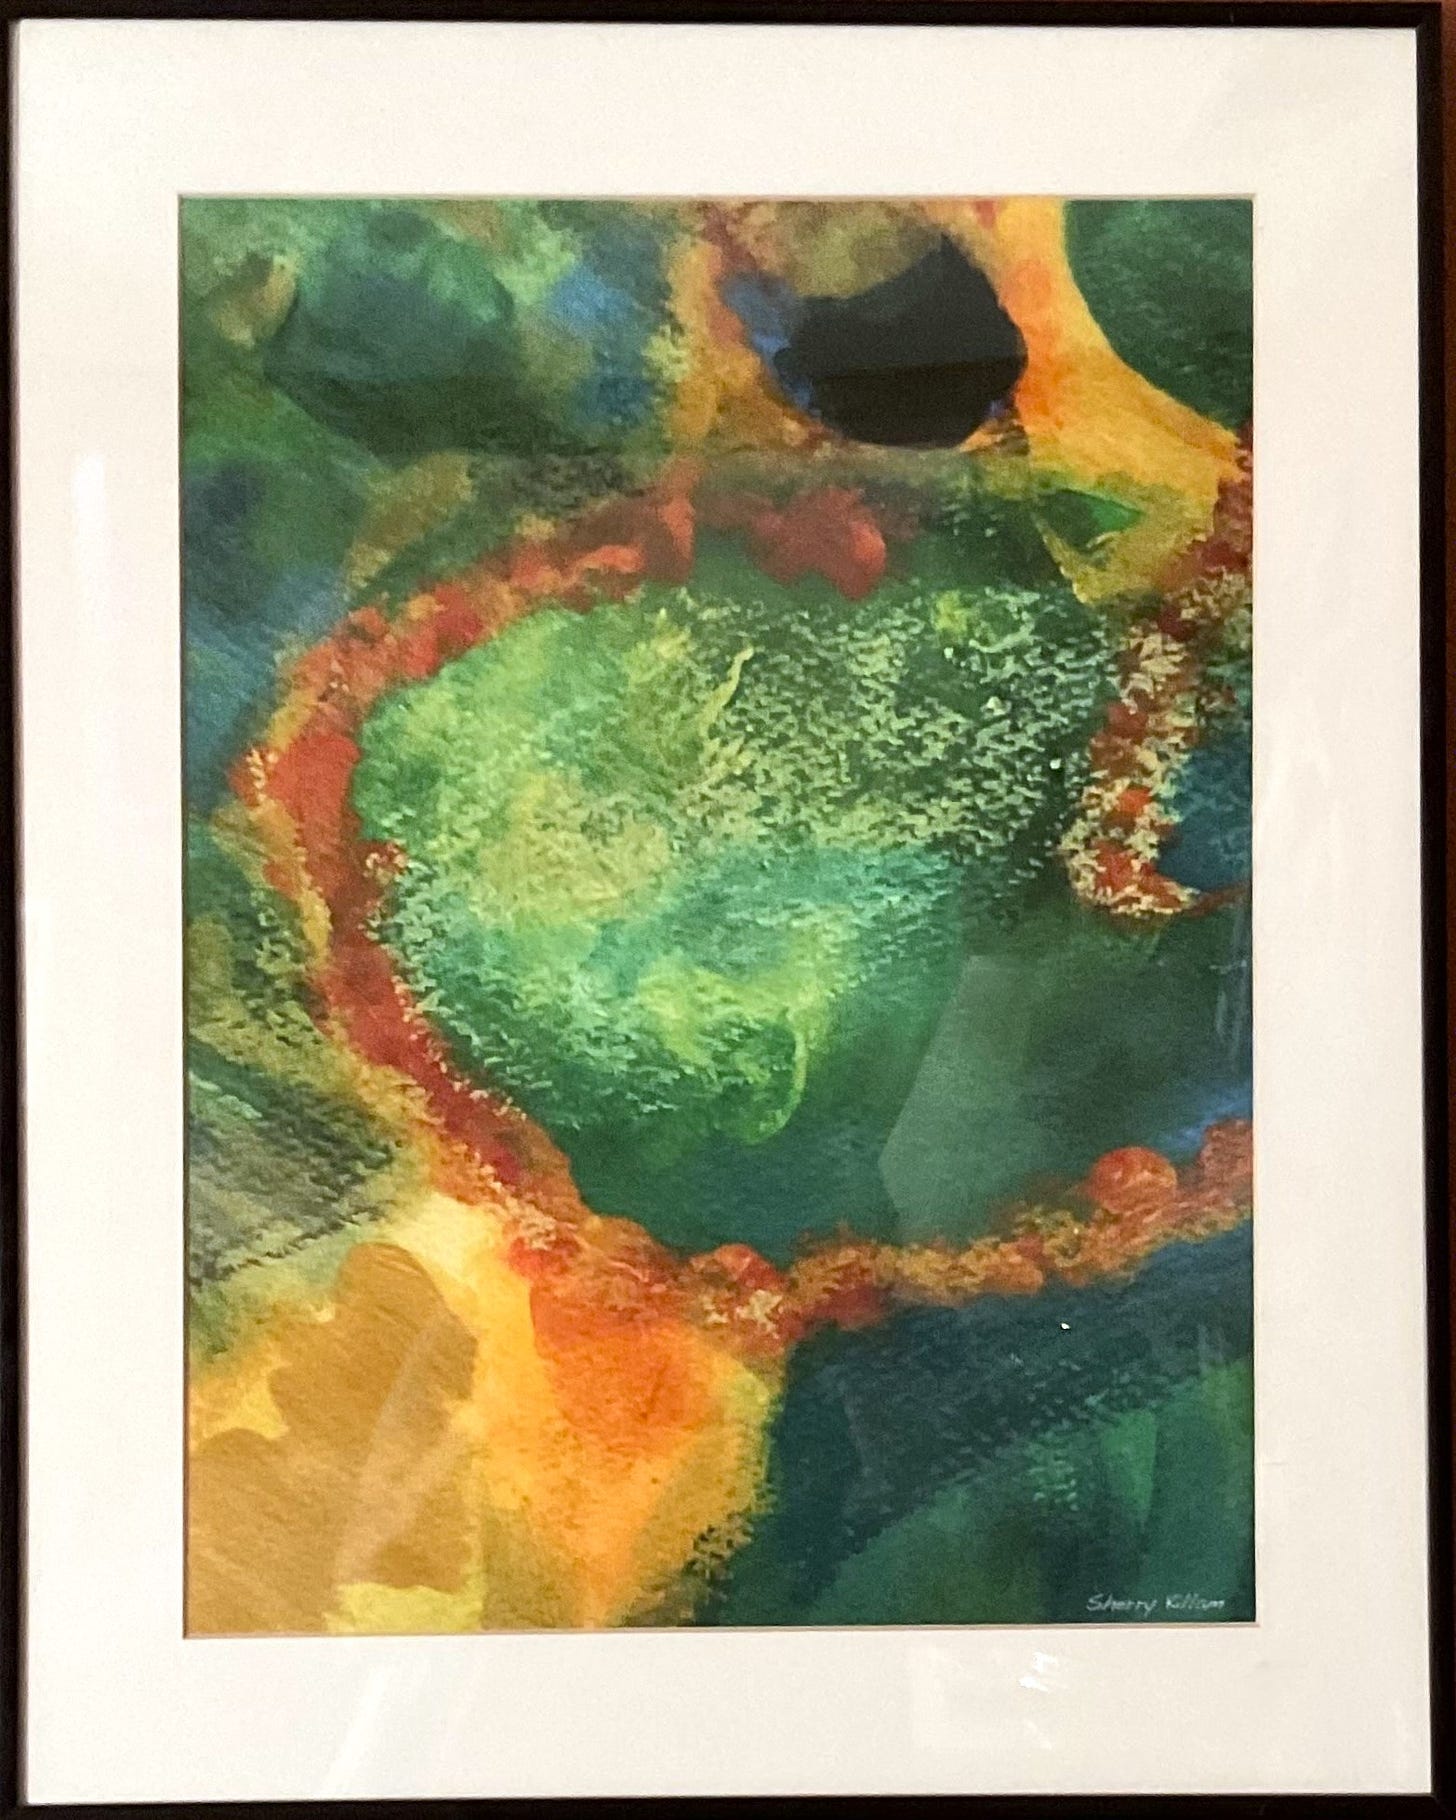 Matted and framed photo of a detail from a mixed media painting by Sherry Killam Arts suggesting a natural habitat with earthy golds and browns, and watery greens and blues.